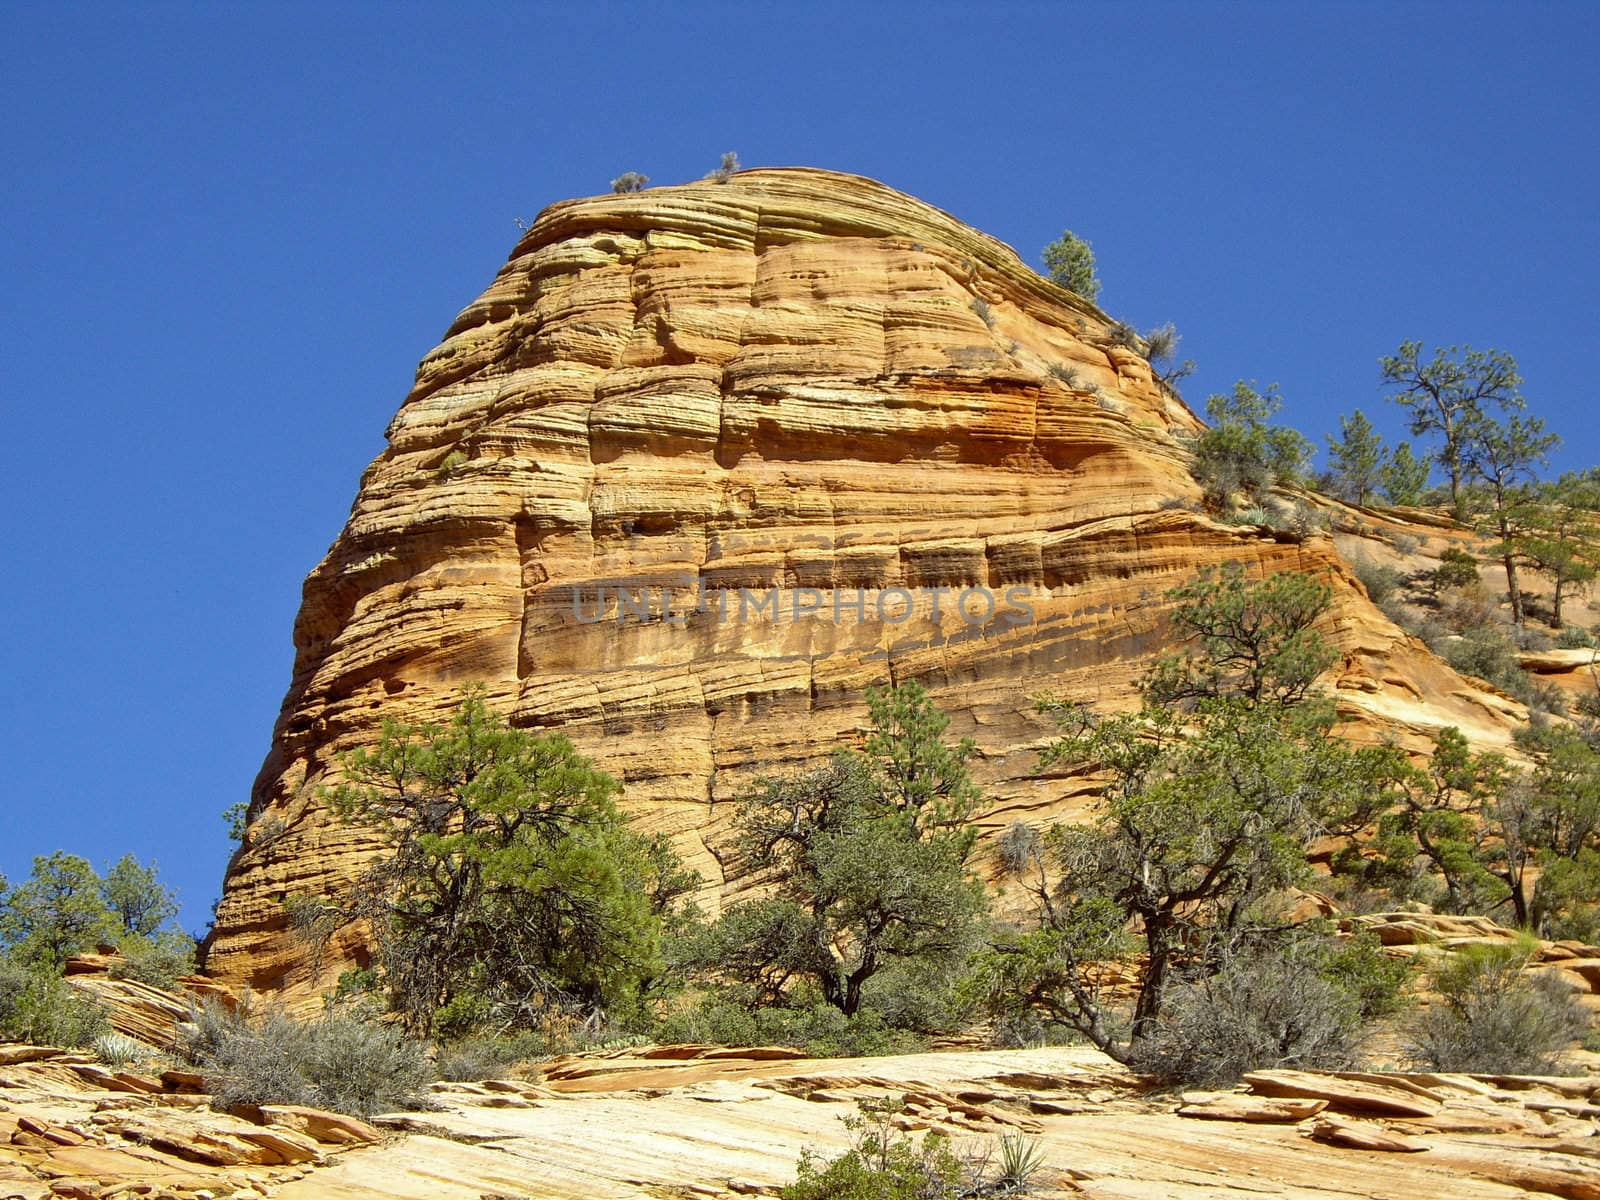 Large rock shows geological strata Zion